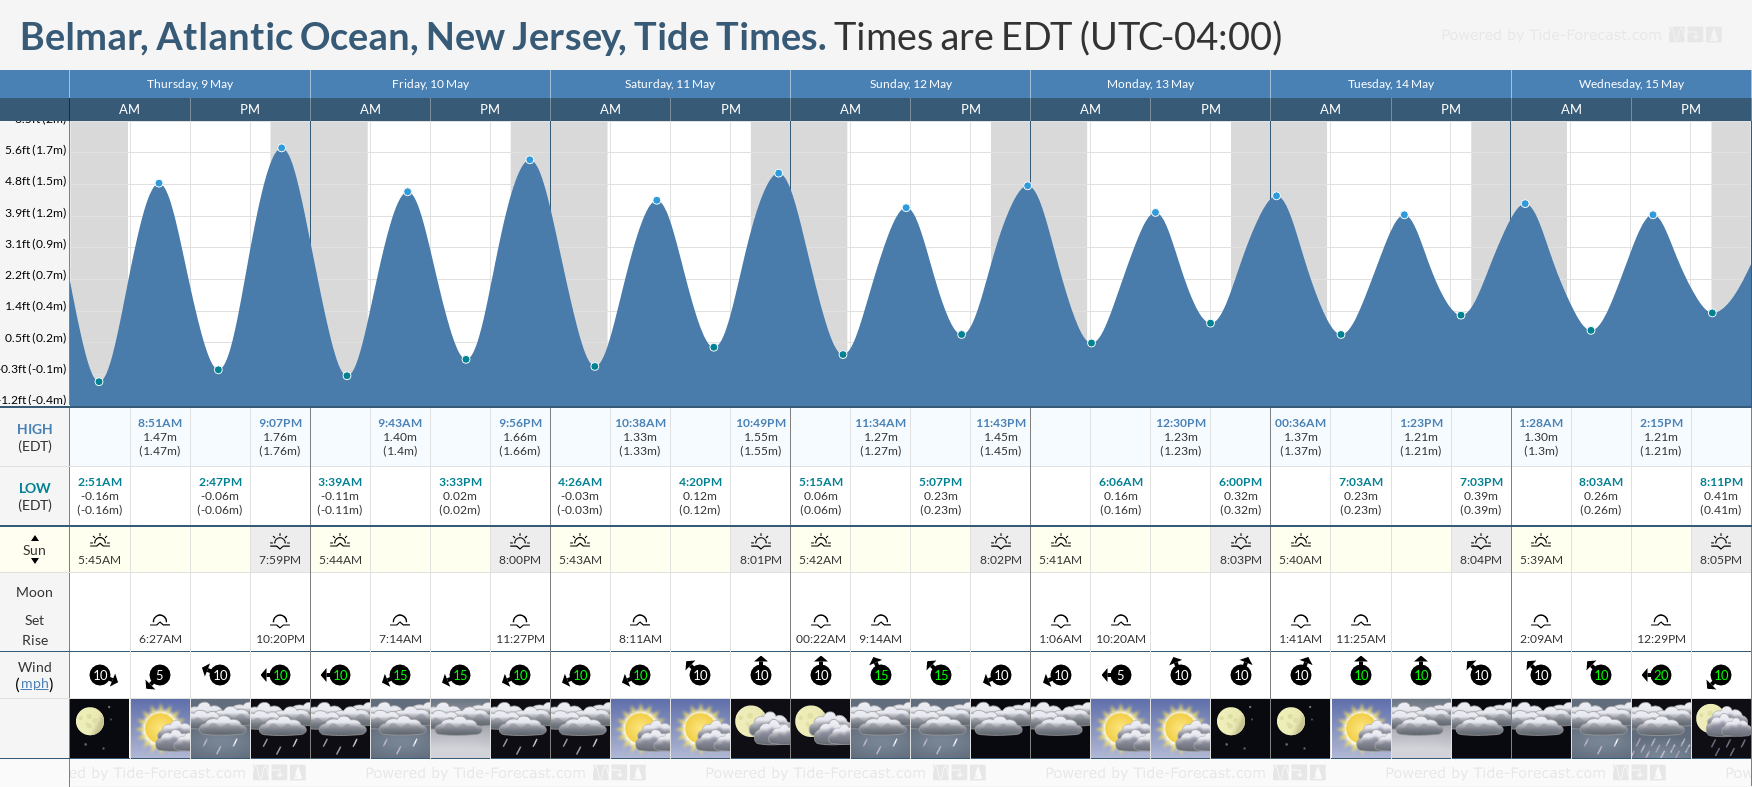 Belmar, Atlantic Ocean, New Jersey Tide Chart including high and low tide tide times for the next 7 days